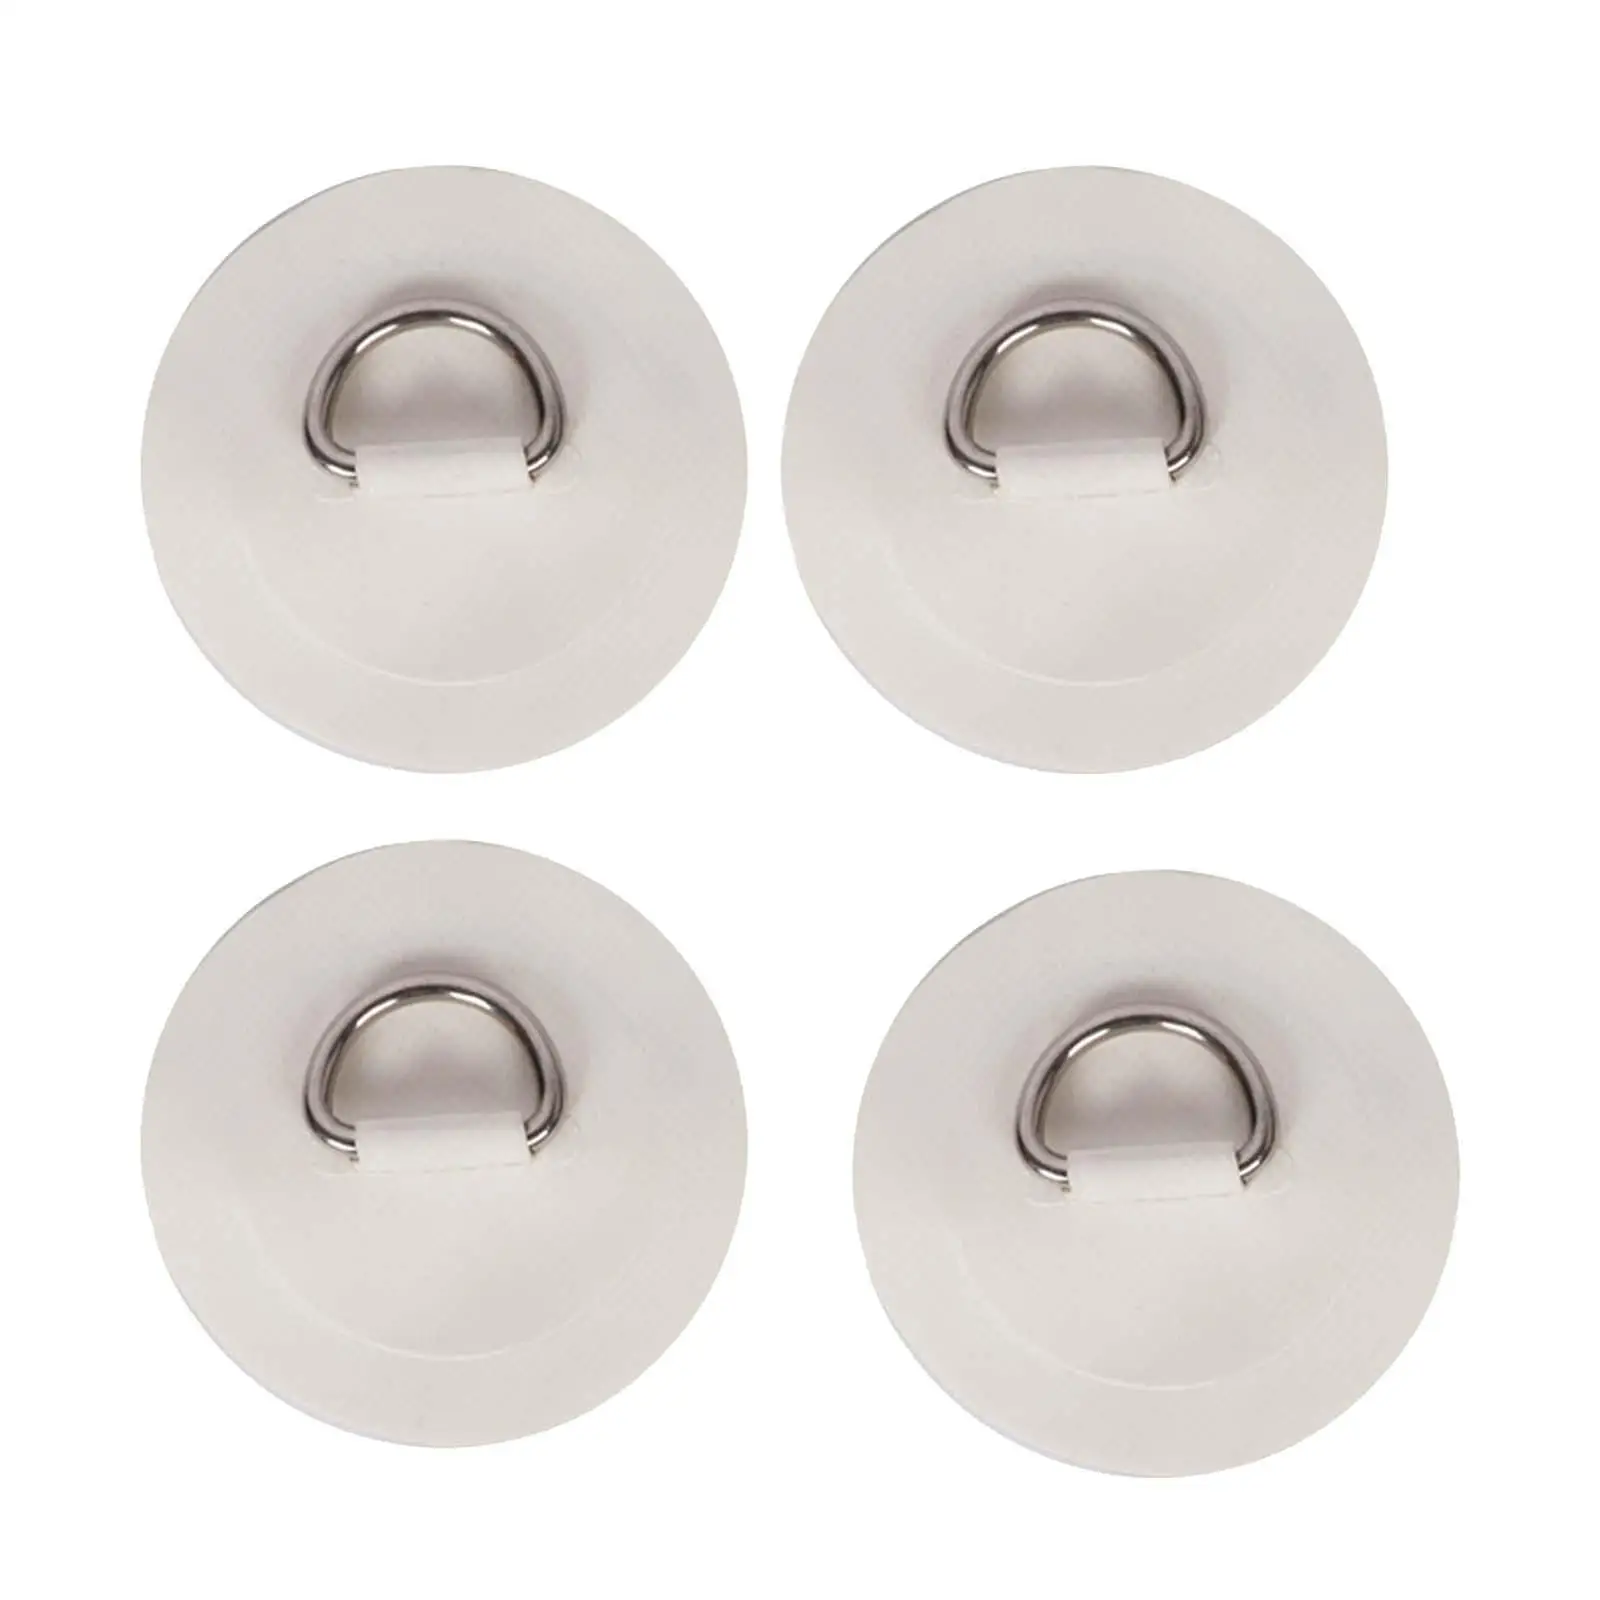 4 Pieces Stainless Steel D Rings Patch Boats Surfboard Kayaks Canoes Lightweight PVC Inflatable Boats D Rings Pad PVC Patch